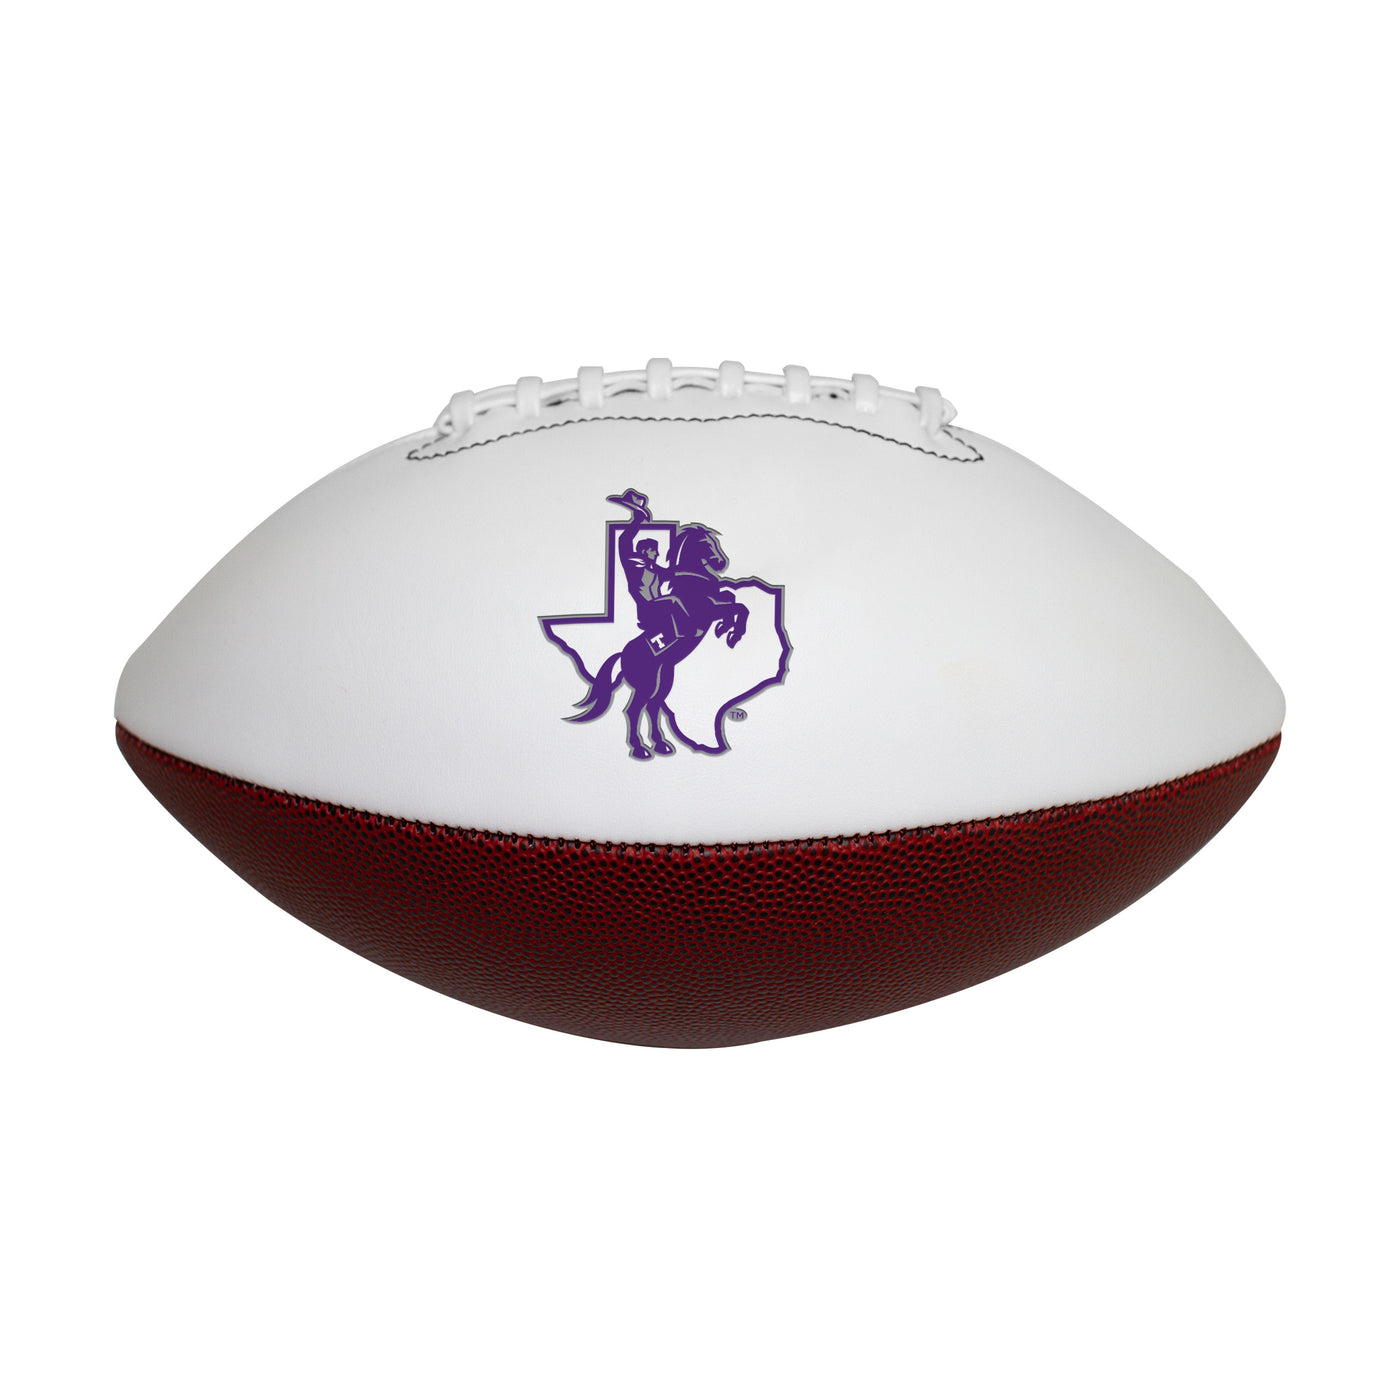 Tarleton State Official-Size Autograph Football